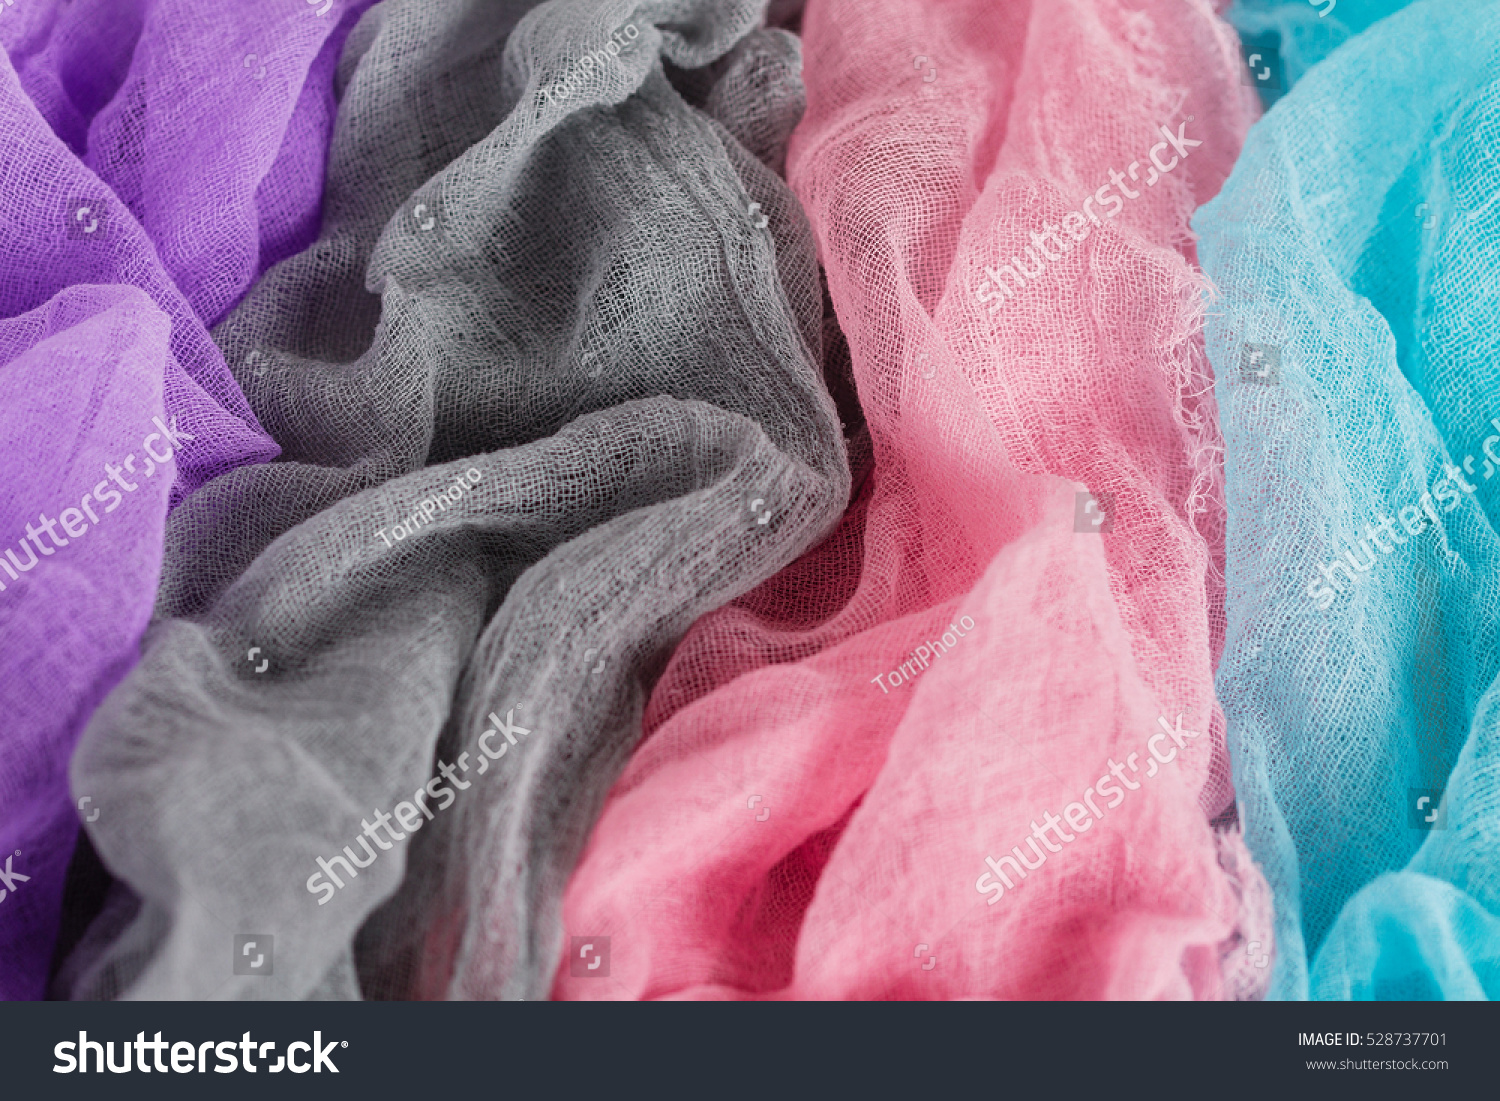 https://www.shutterstock.com/pic-528737701/stock-photo-hand-dyed-gauze-fabric-colorful-cloth-texture-background.html